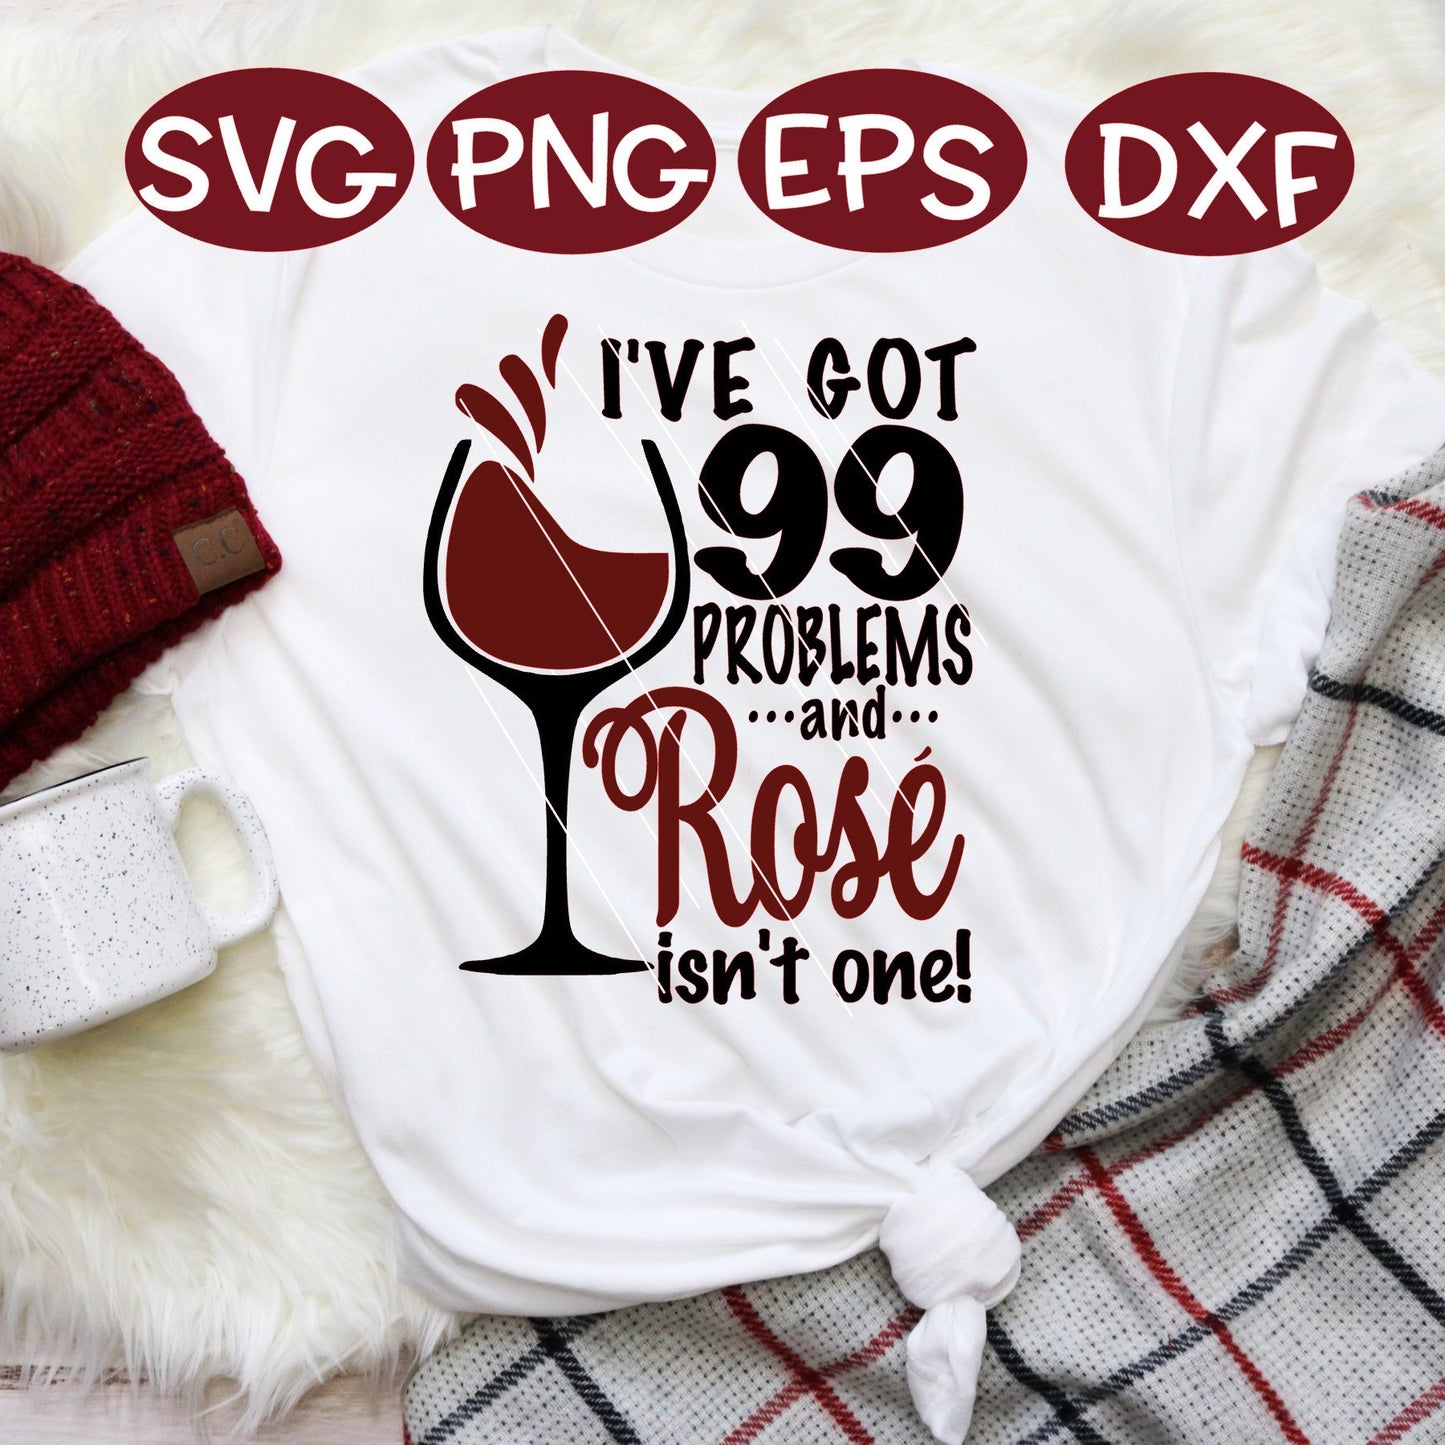 99 Problems, Rose Wine, Rose Wine svg, Funny, svg, dxf, png, digital cut file, 99 problems svg, dxf, eps, instant, Silhouette Cameo, Cricut